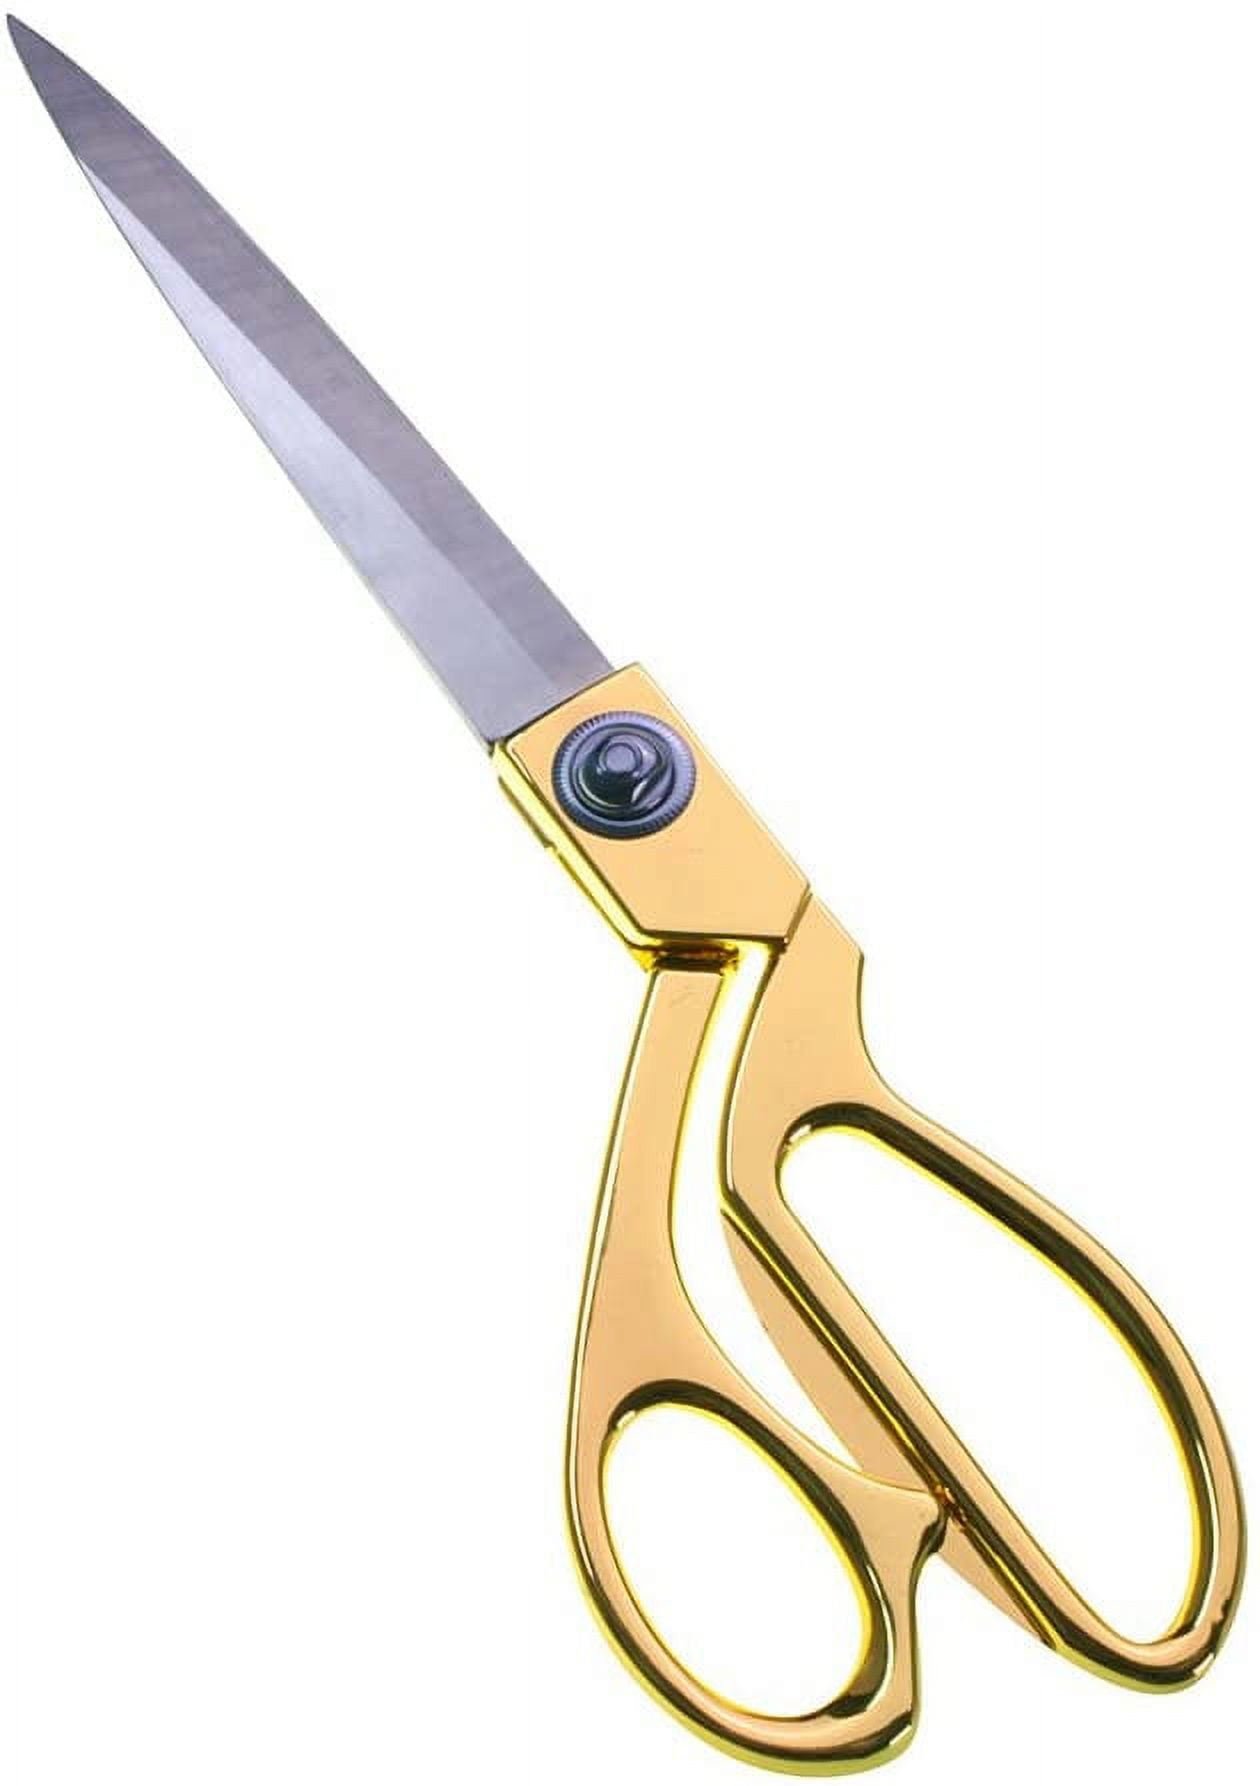 Sharp Sewing Snips Gold Scissors Gift for Embroiderer/sewer